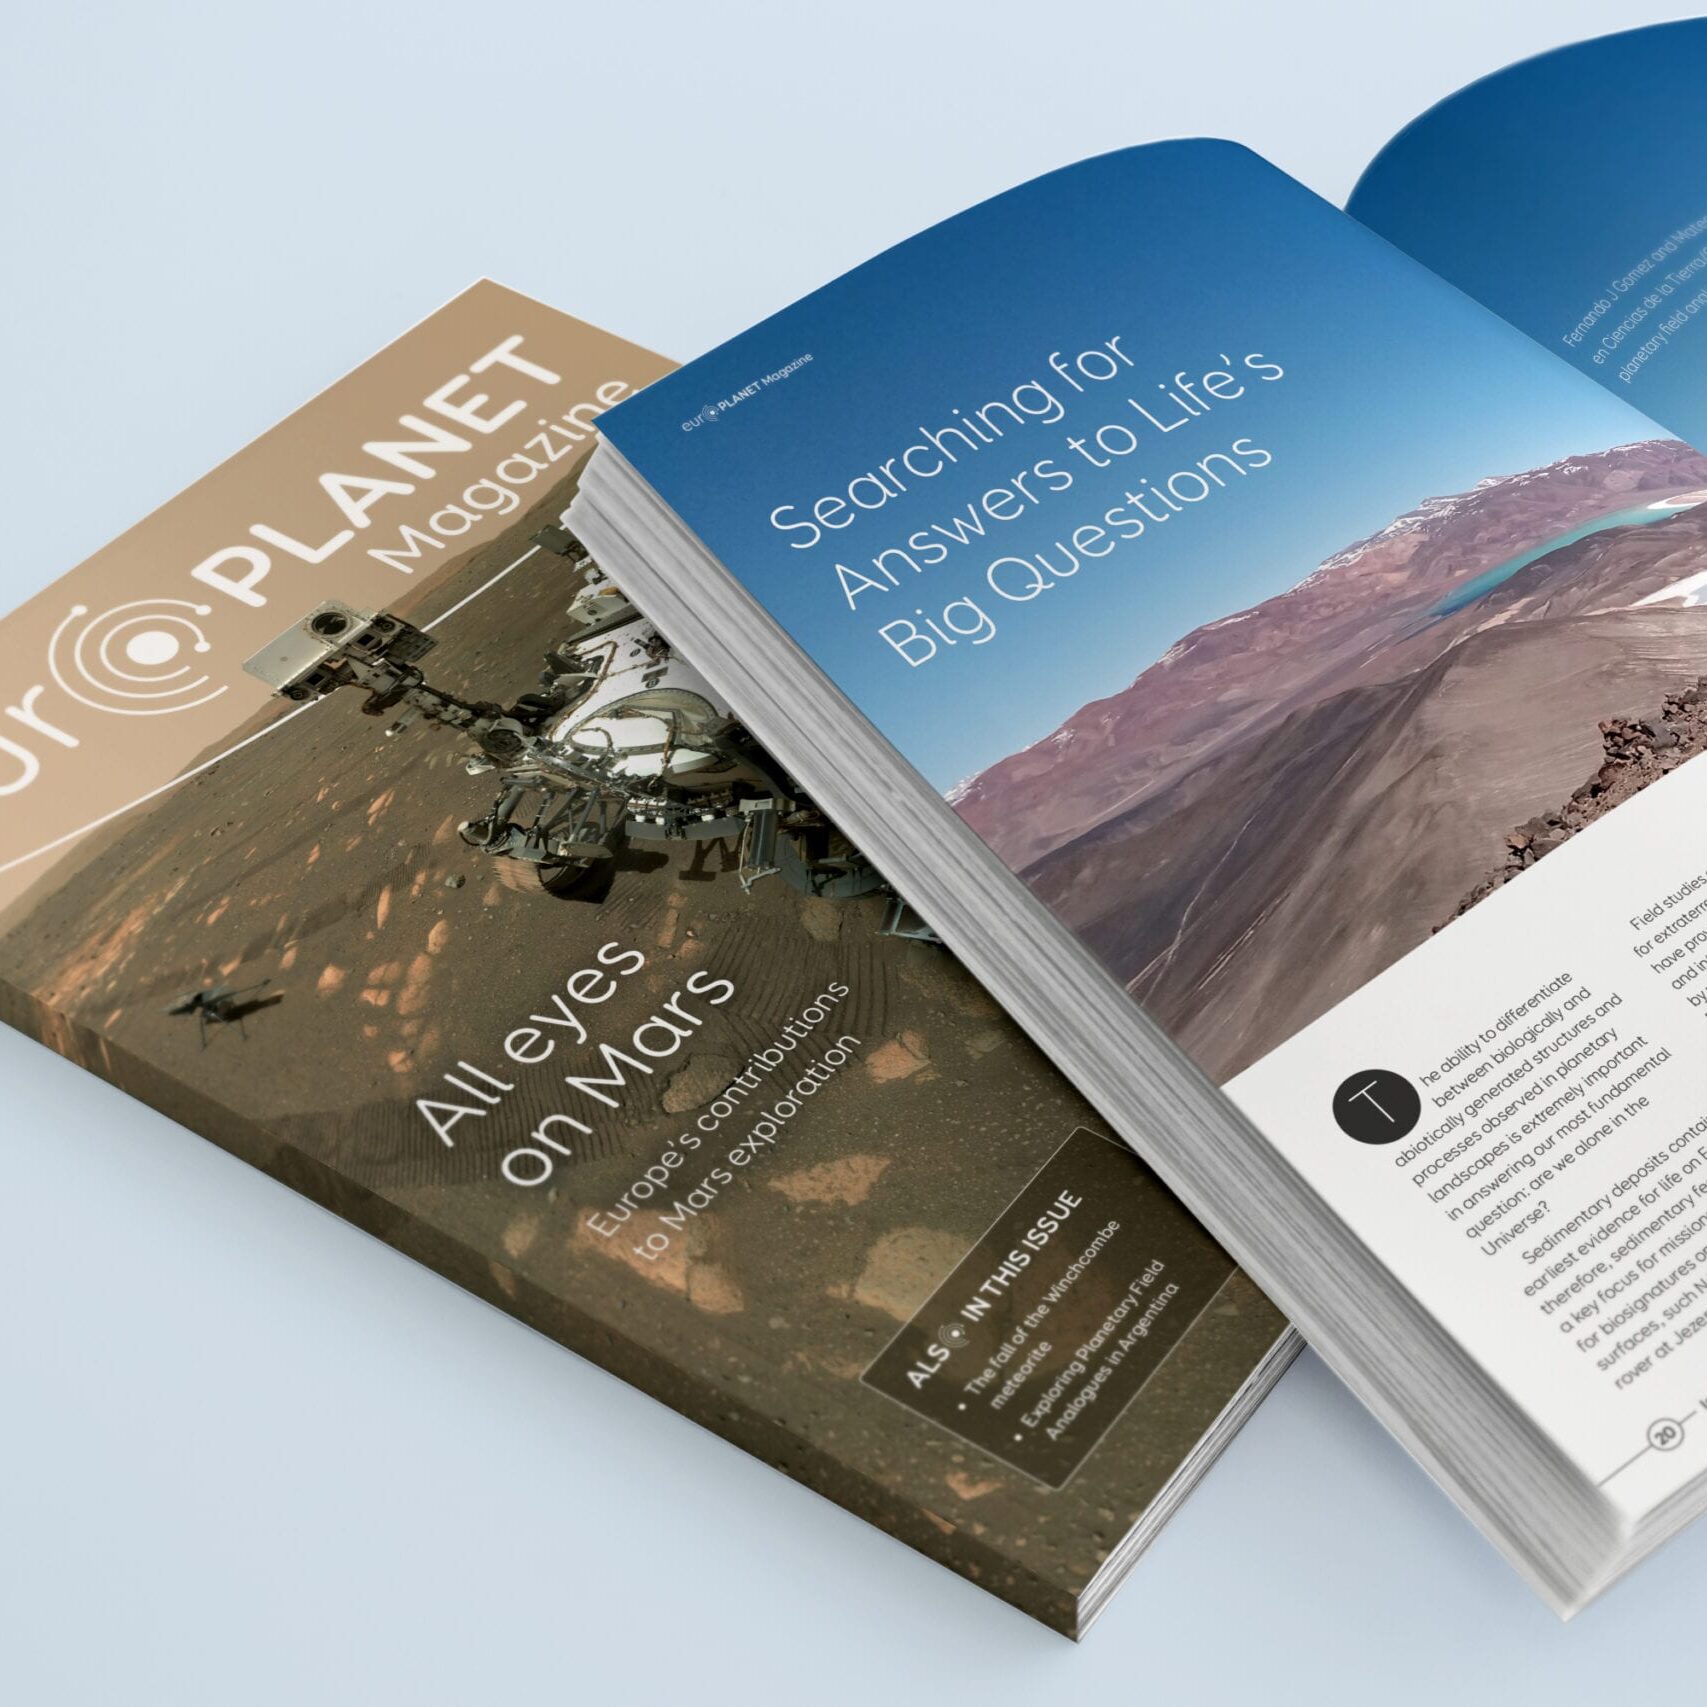 A planetary science magazine design for The Europlanet Society